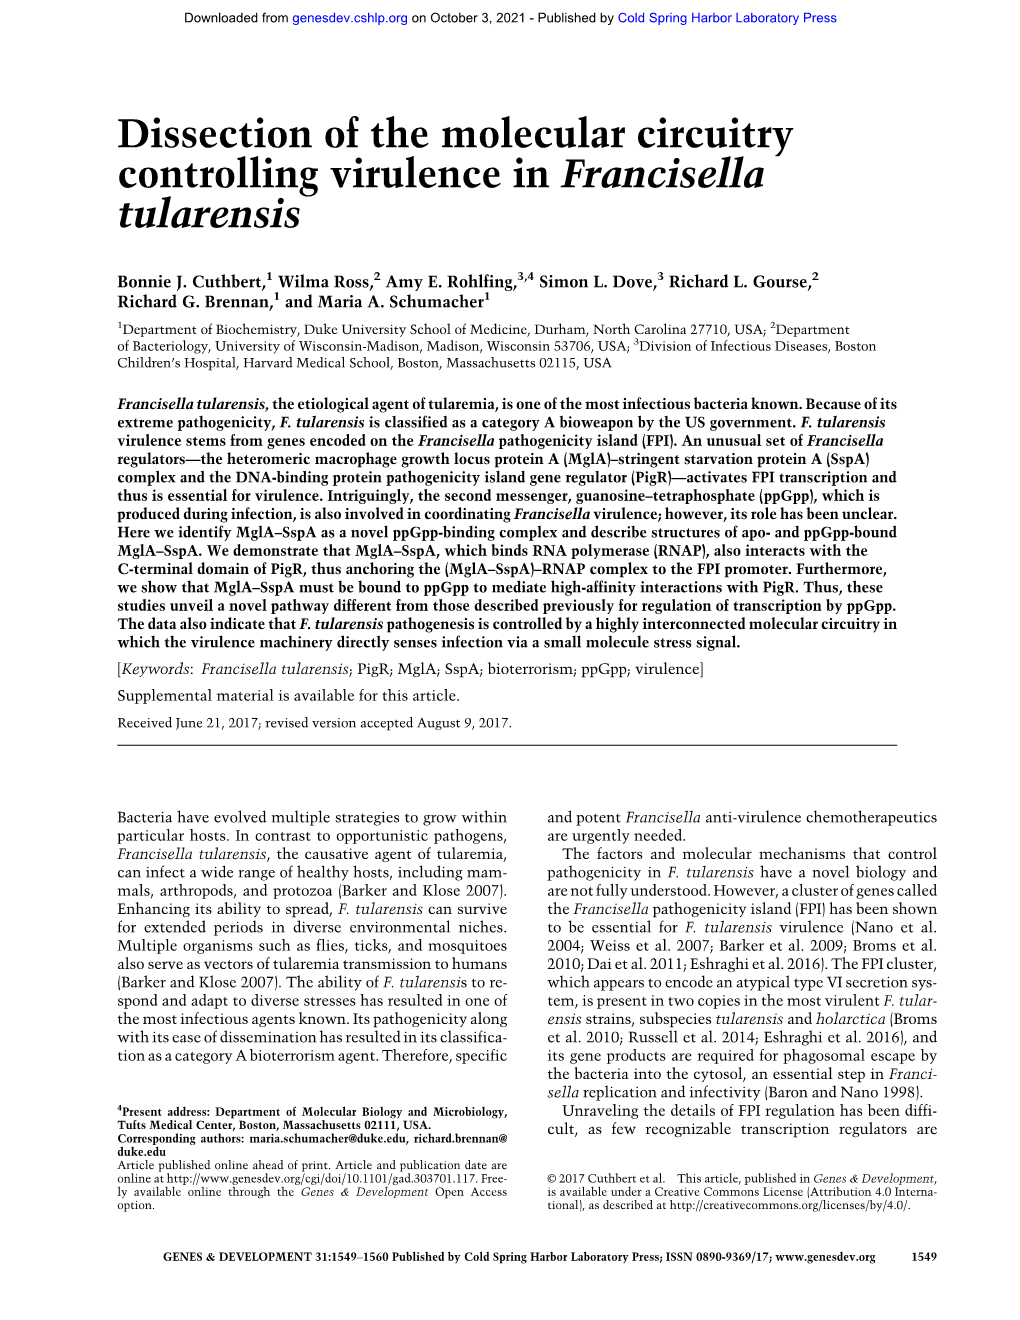 Dissection of the Molecular Circuitry Controlling Virulence in Francisella Tularensis